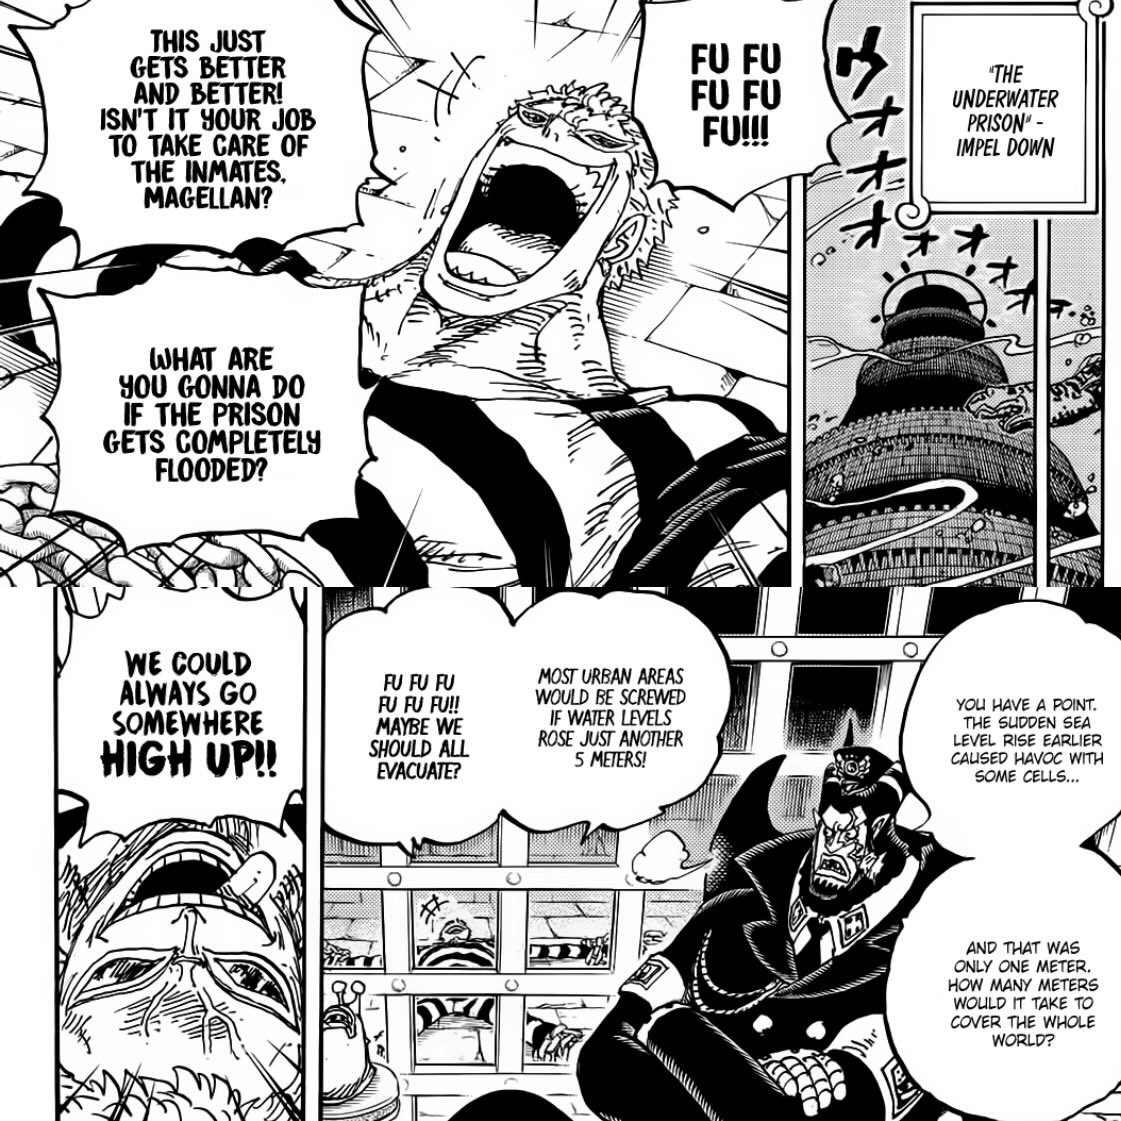 #ONEPIECE1114 

YOOOO THE GOAT IS BACK SOMEONE PLEASE GET THIS MAN OUT OF PRISON